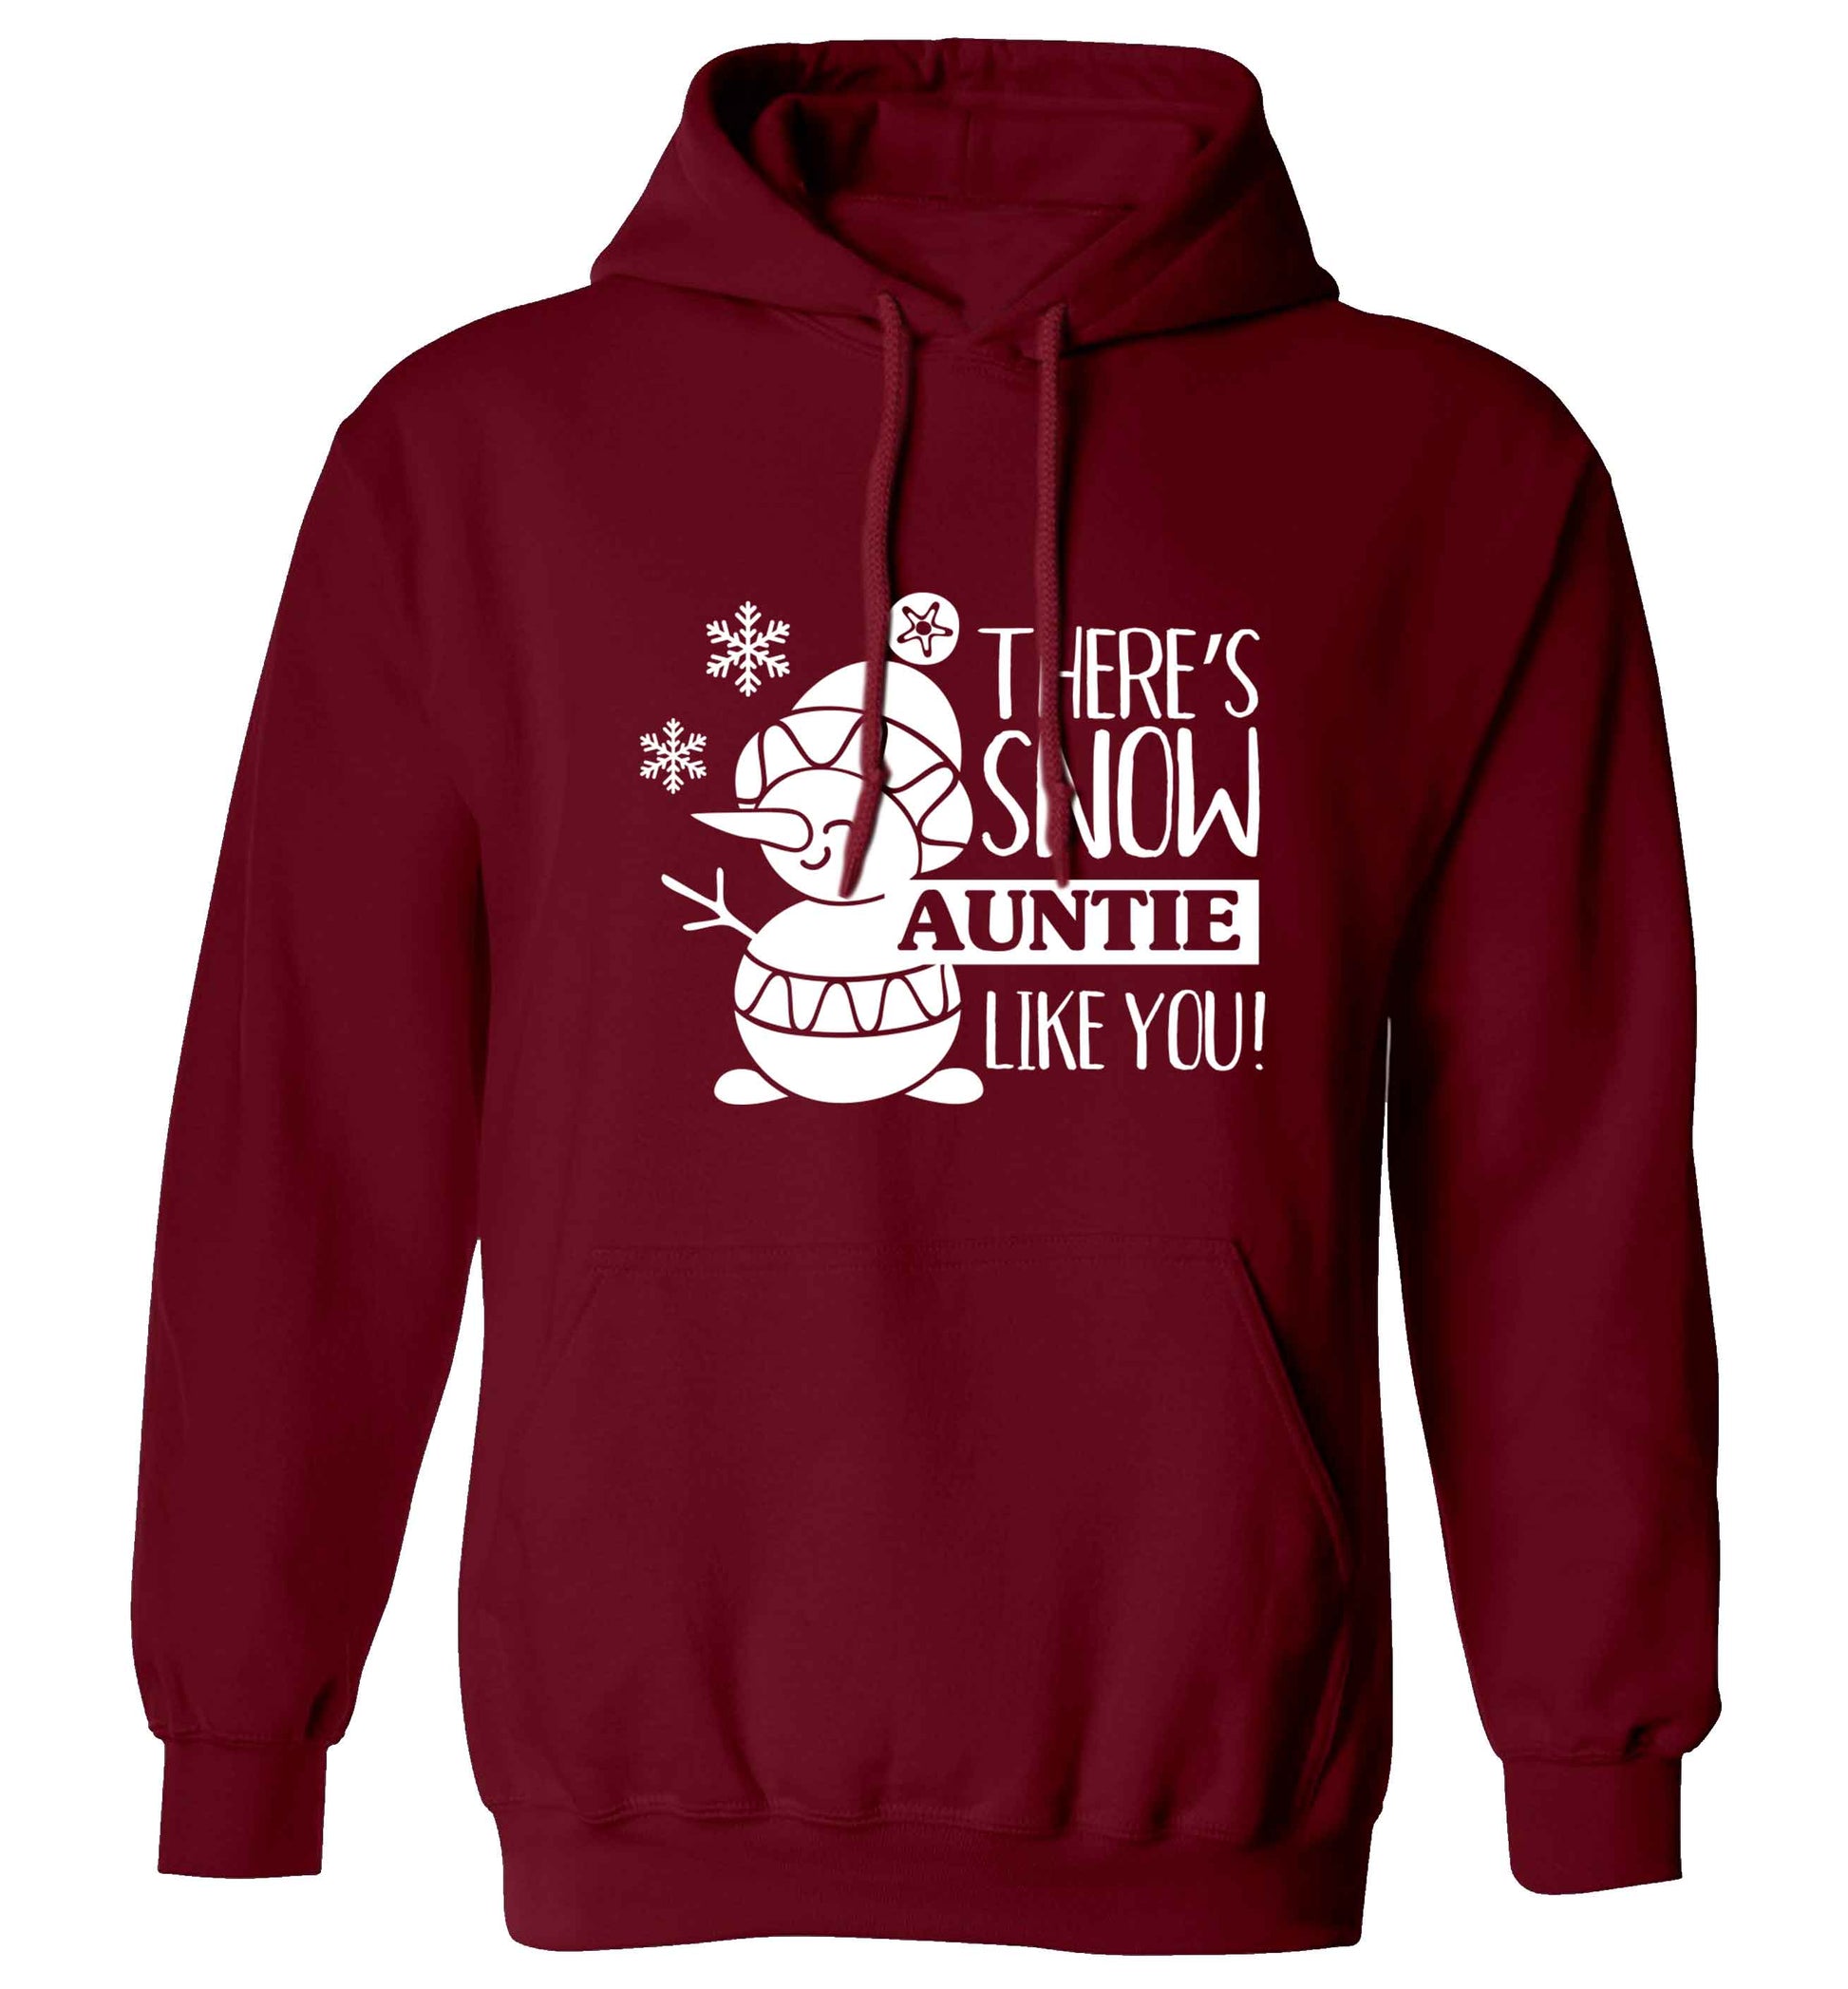 There's snow auntie like you adults unisex maroon hoodie 2XL